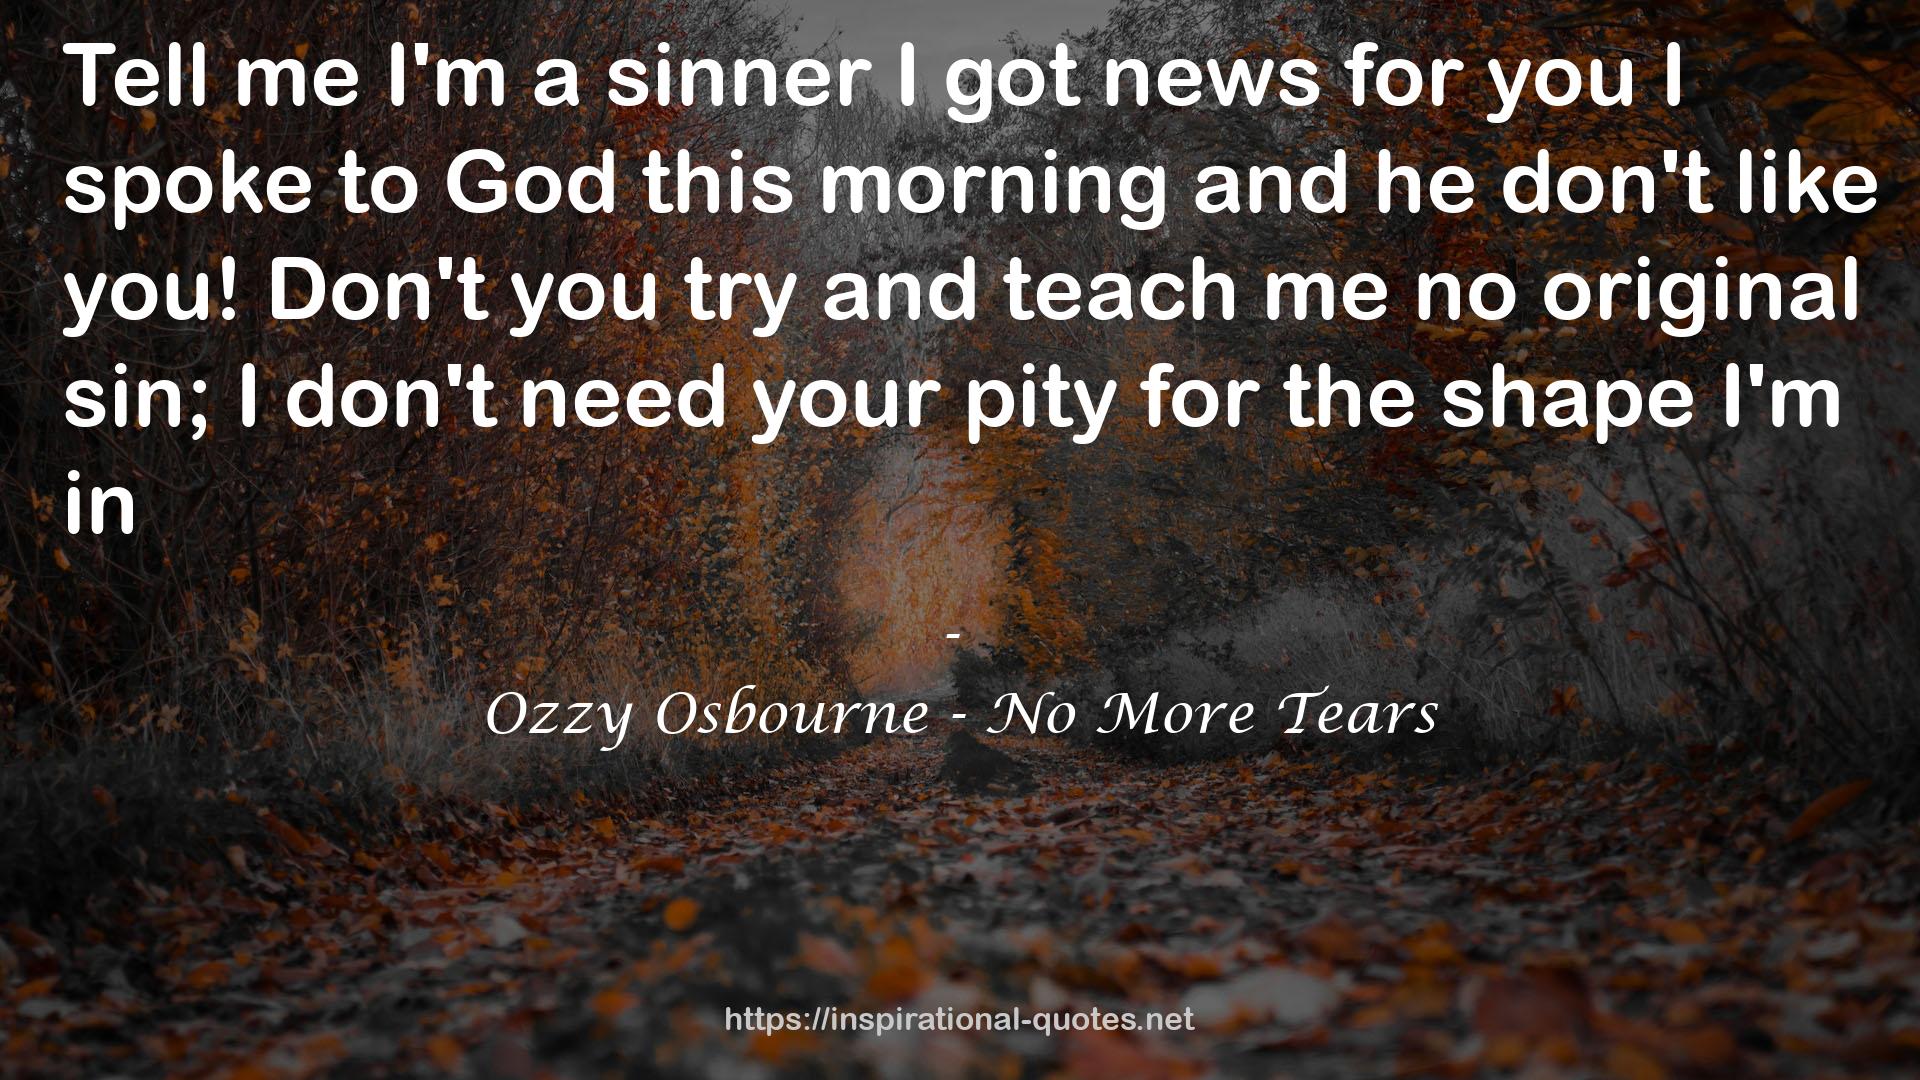 Ozzy Osbourne - No More Tears QUOTES